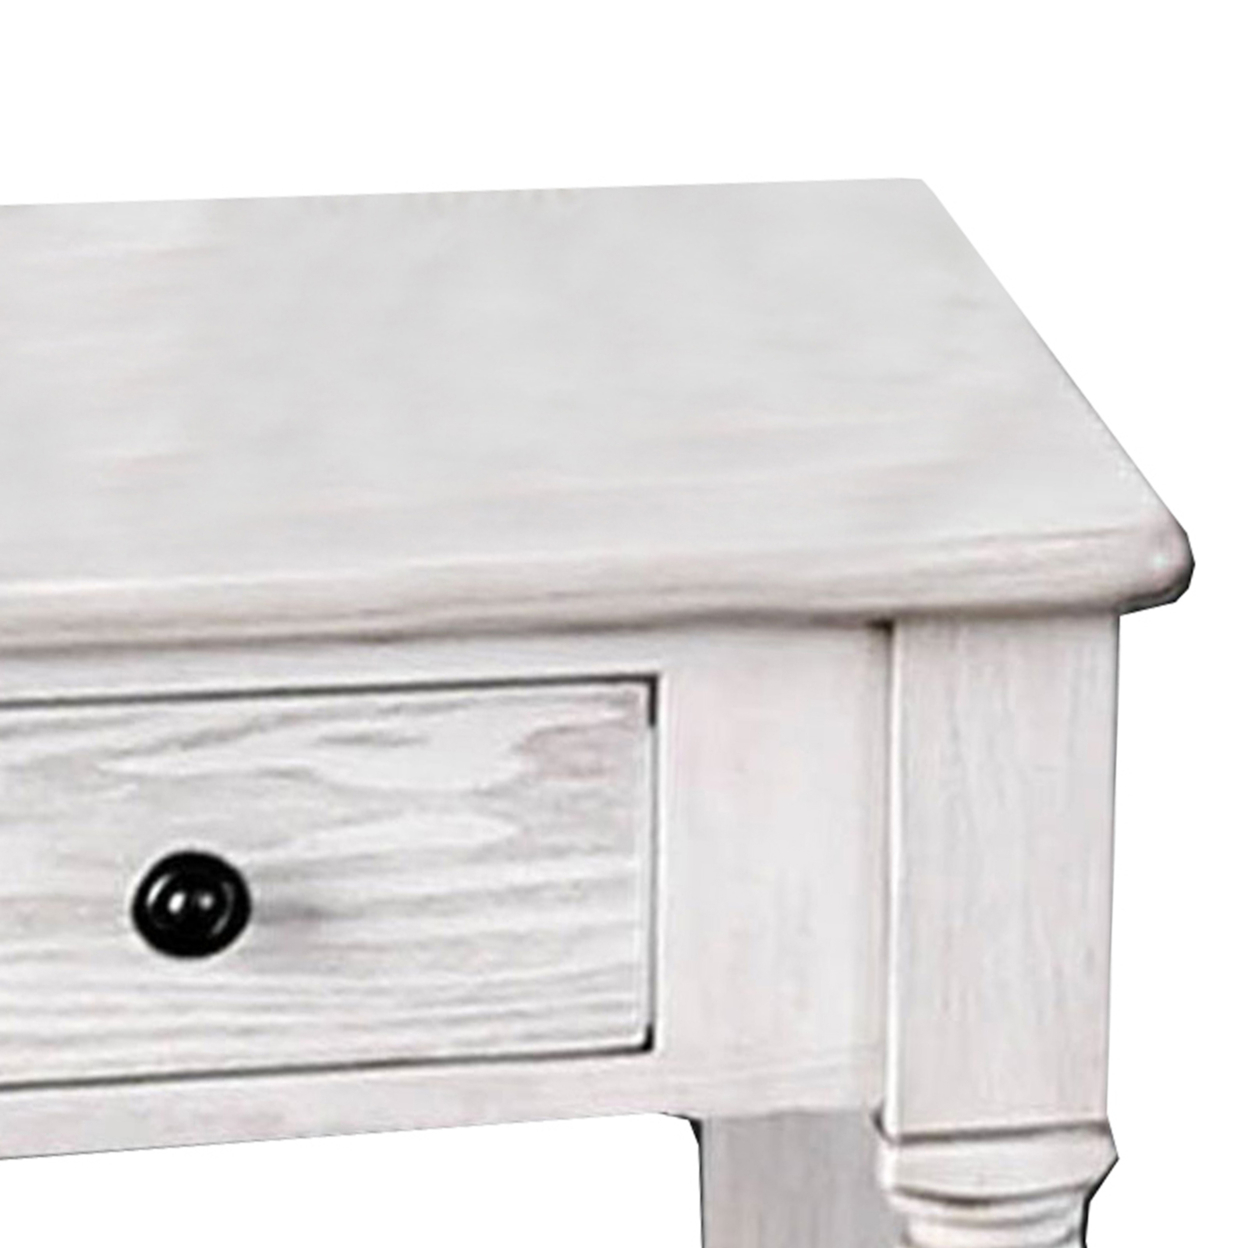 Transitional Style Wooden End Table With 1 Drawer Storage, White- Saltoro Sherpi